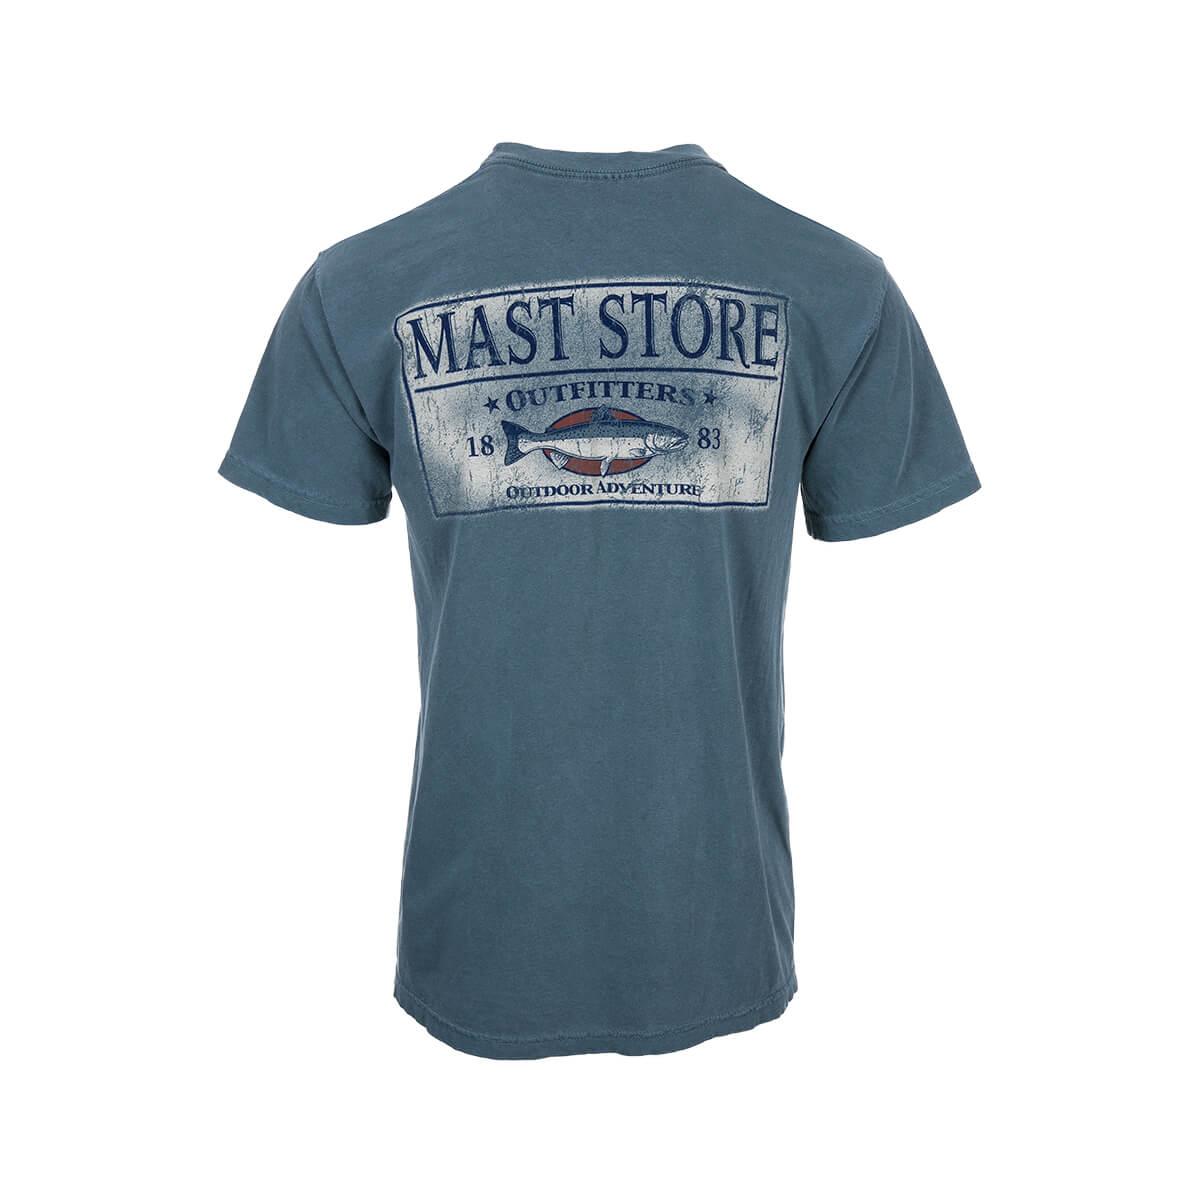  Mast Store Outfitters Trout Short Sleeve T- Shirt